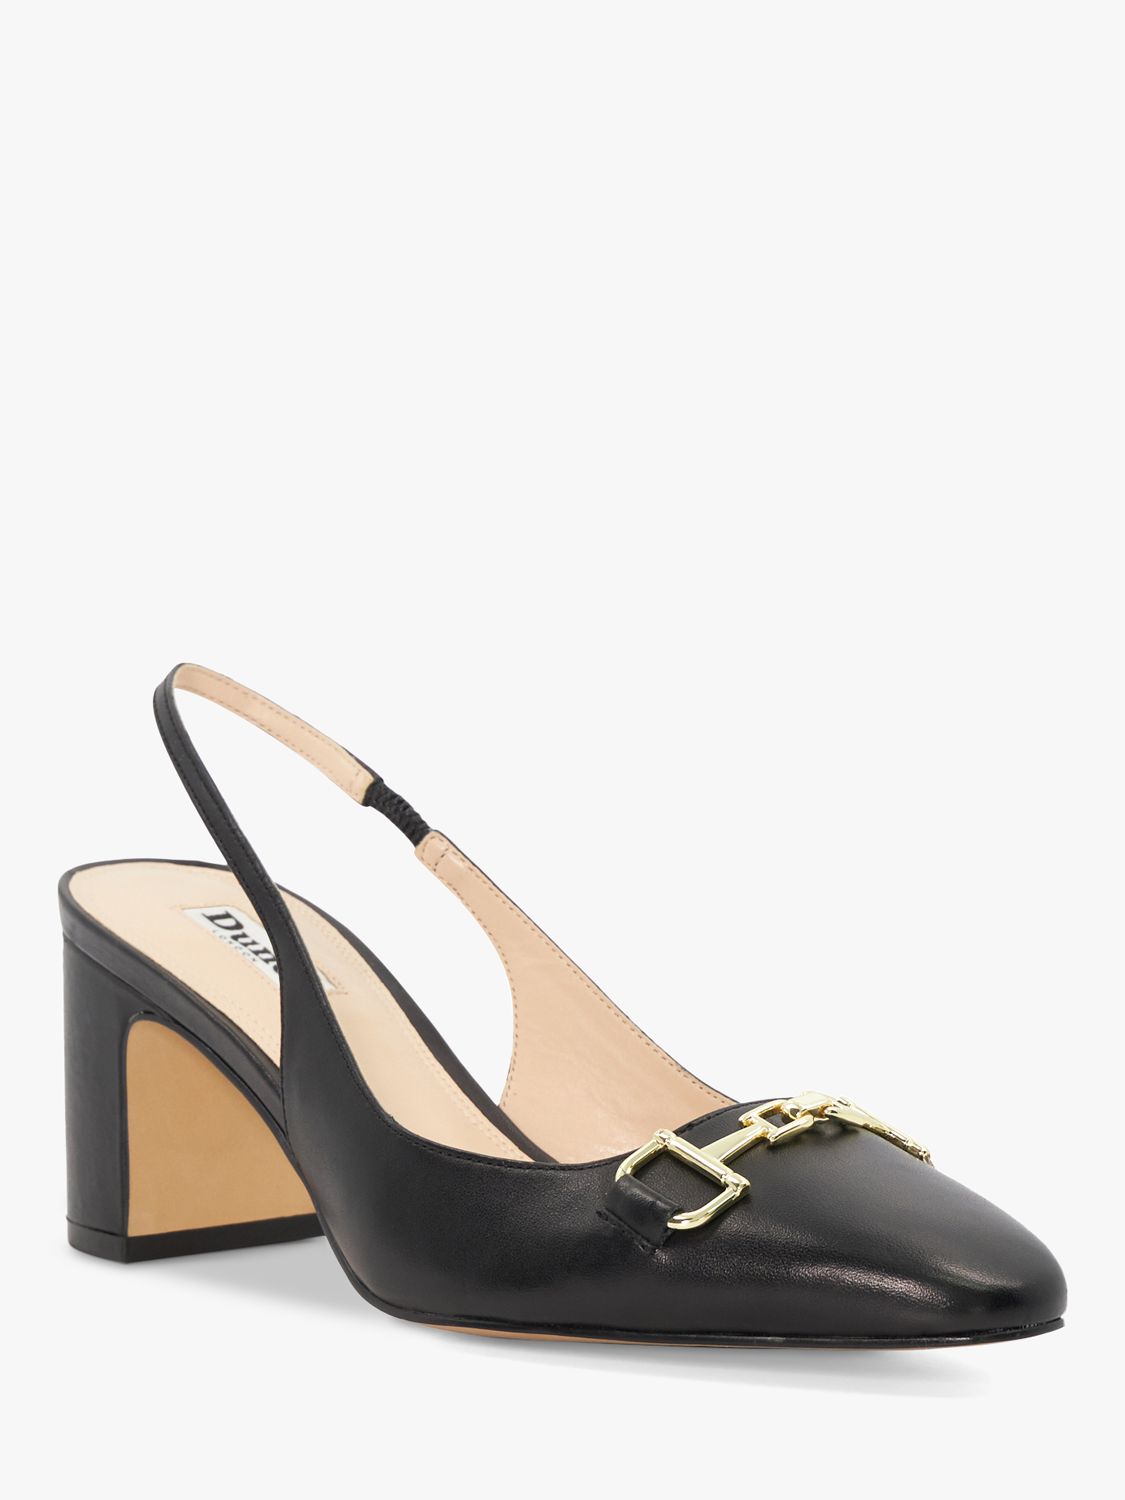 Buy Dune Wide Fit Detailed Leather Court Shoes, Black Online at johnlewis.com